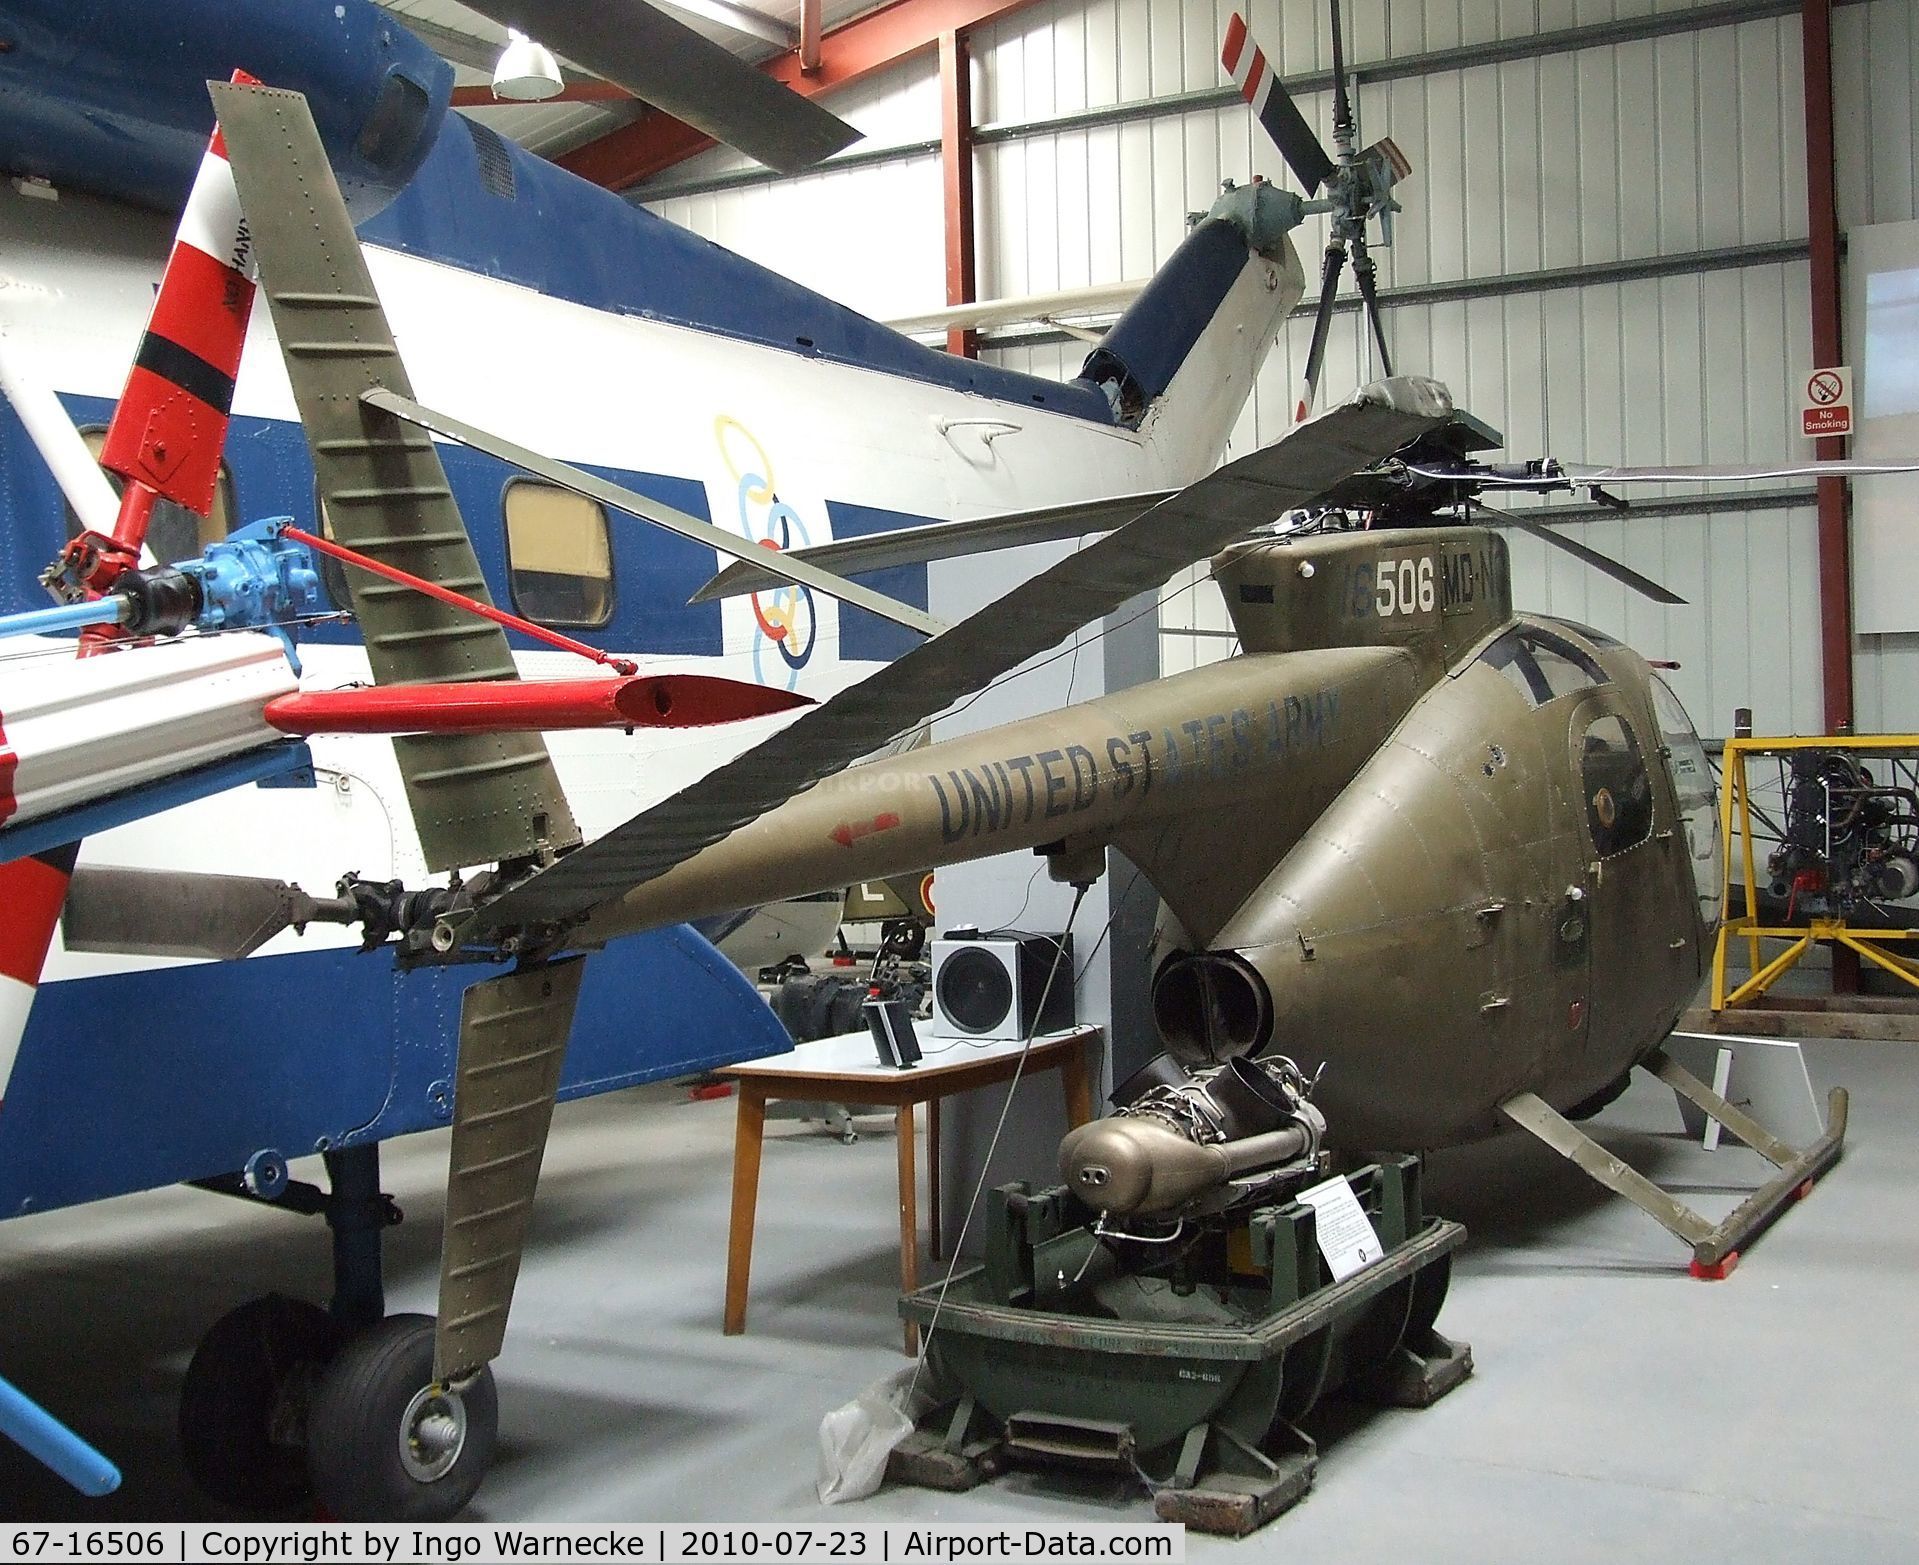 67-16506, 1963 Hughes OH-6A Cayuse C/N 0891, Hughes YOH-6A Cayuse at the Helicopter Museum, Weston-super-Mare